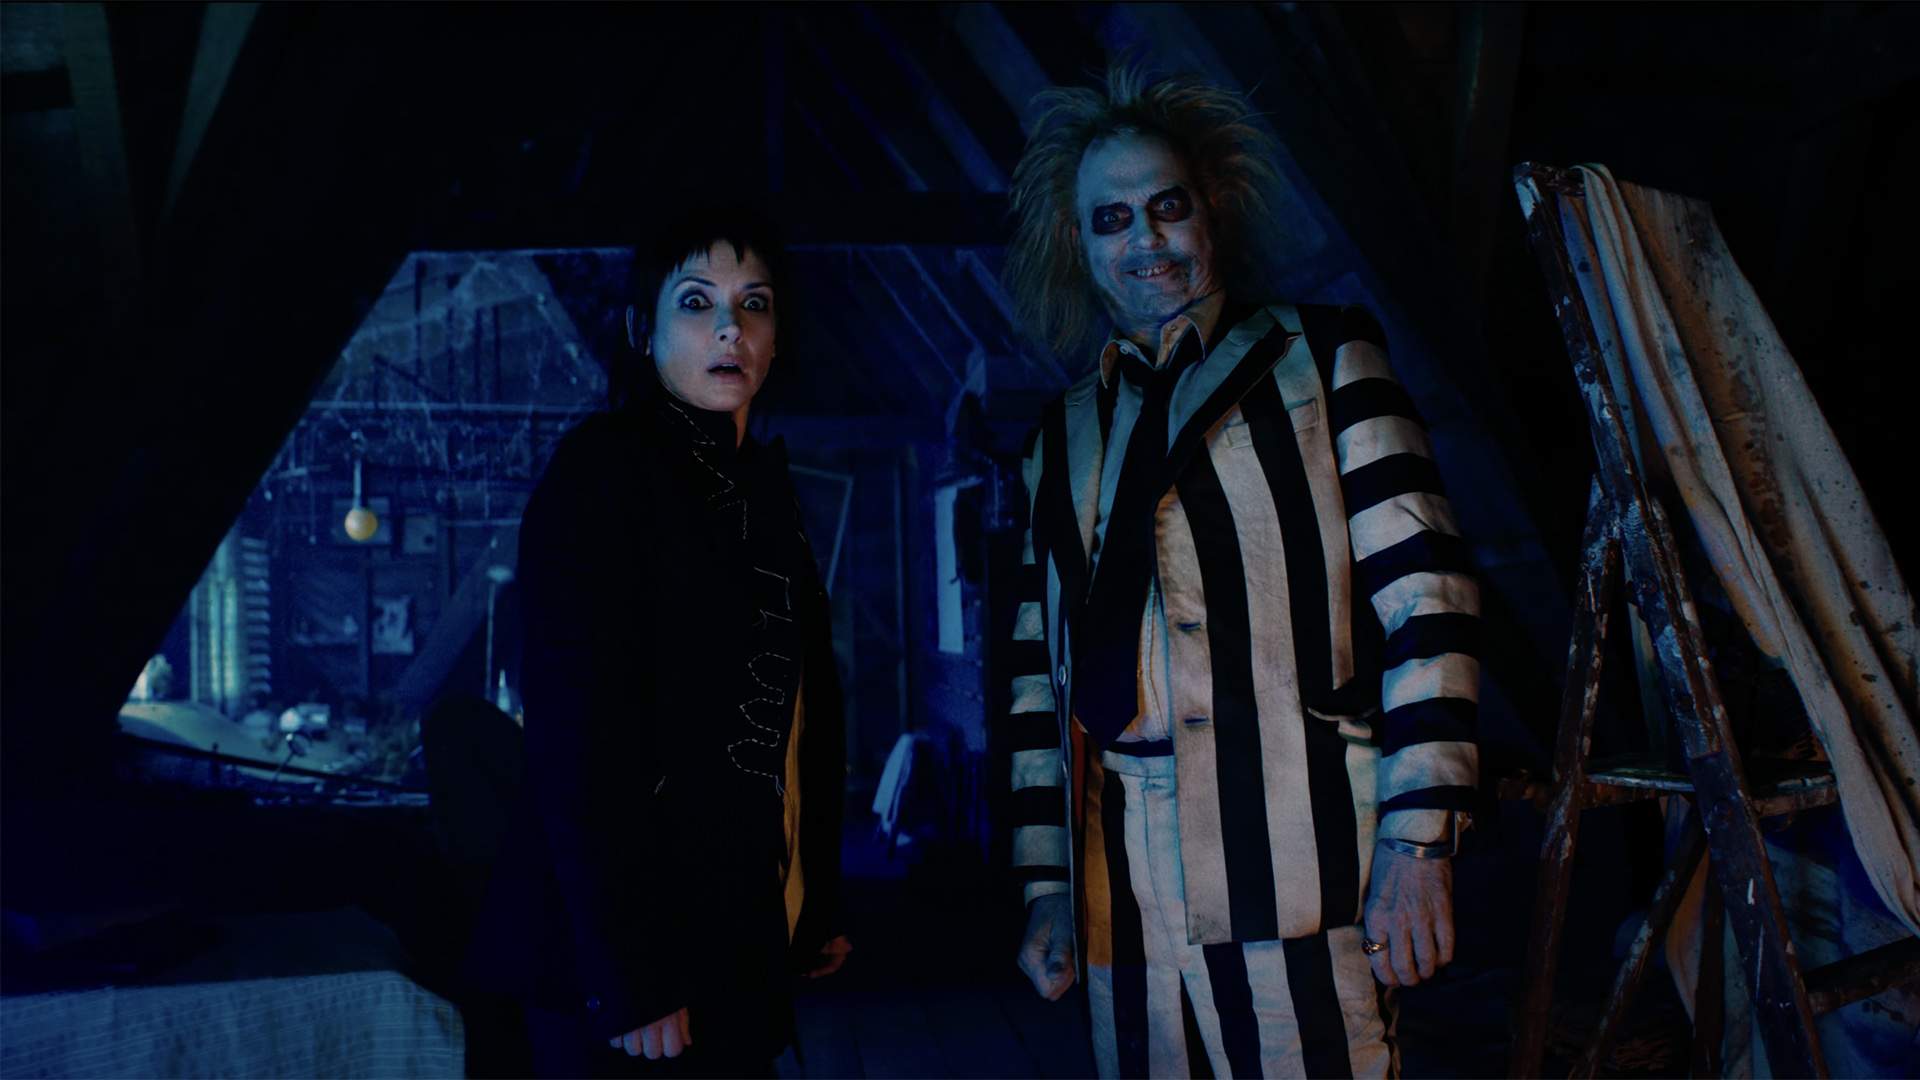 Winona Ryder and Jenna Ortega Bring Back the Ghost with the Most in the Full 'Beetlejuice Beetlejuice' Trailer